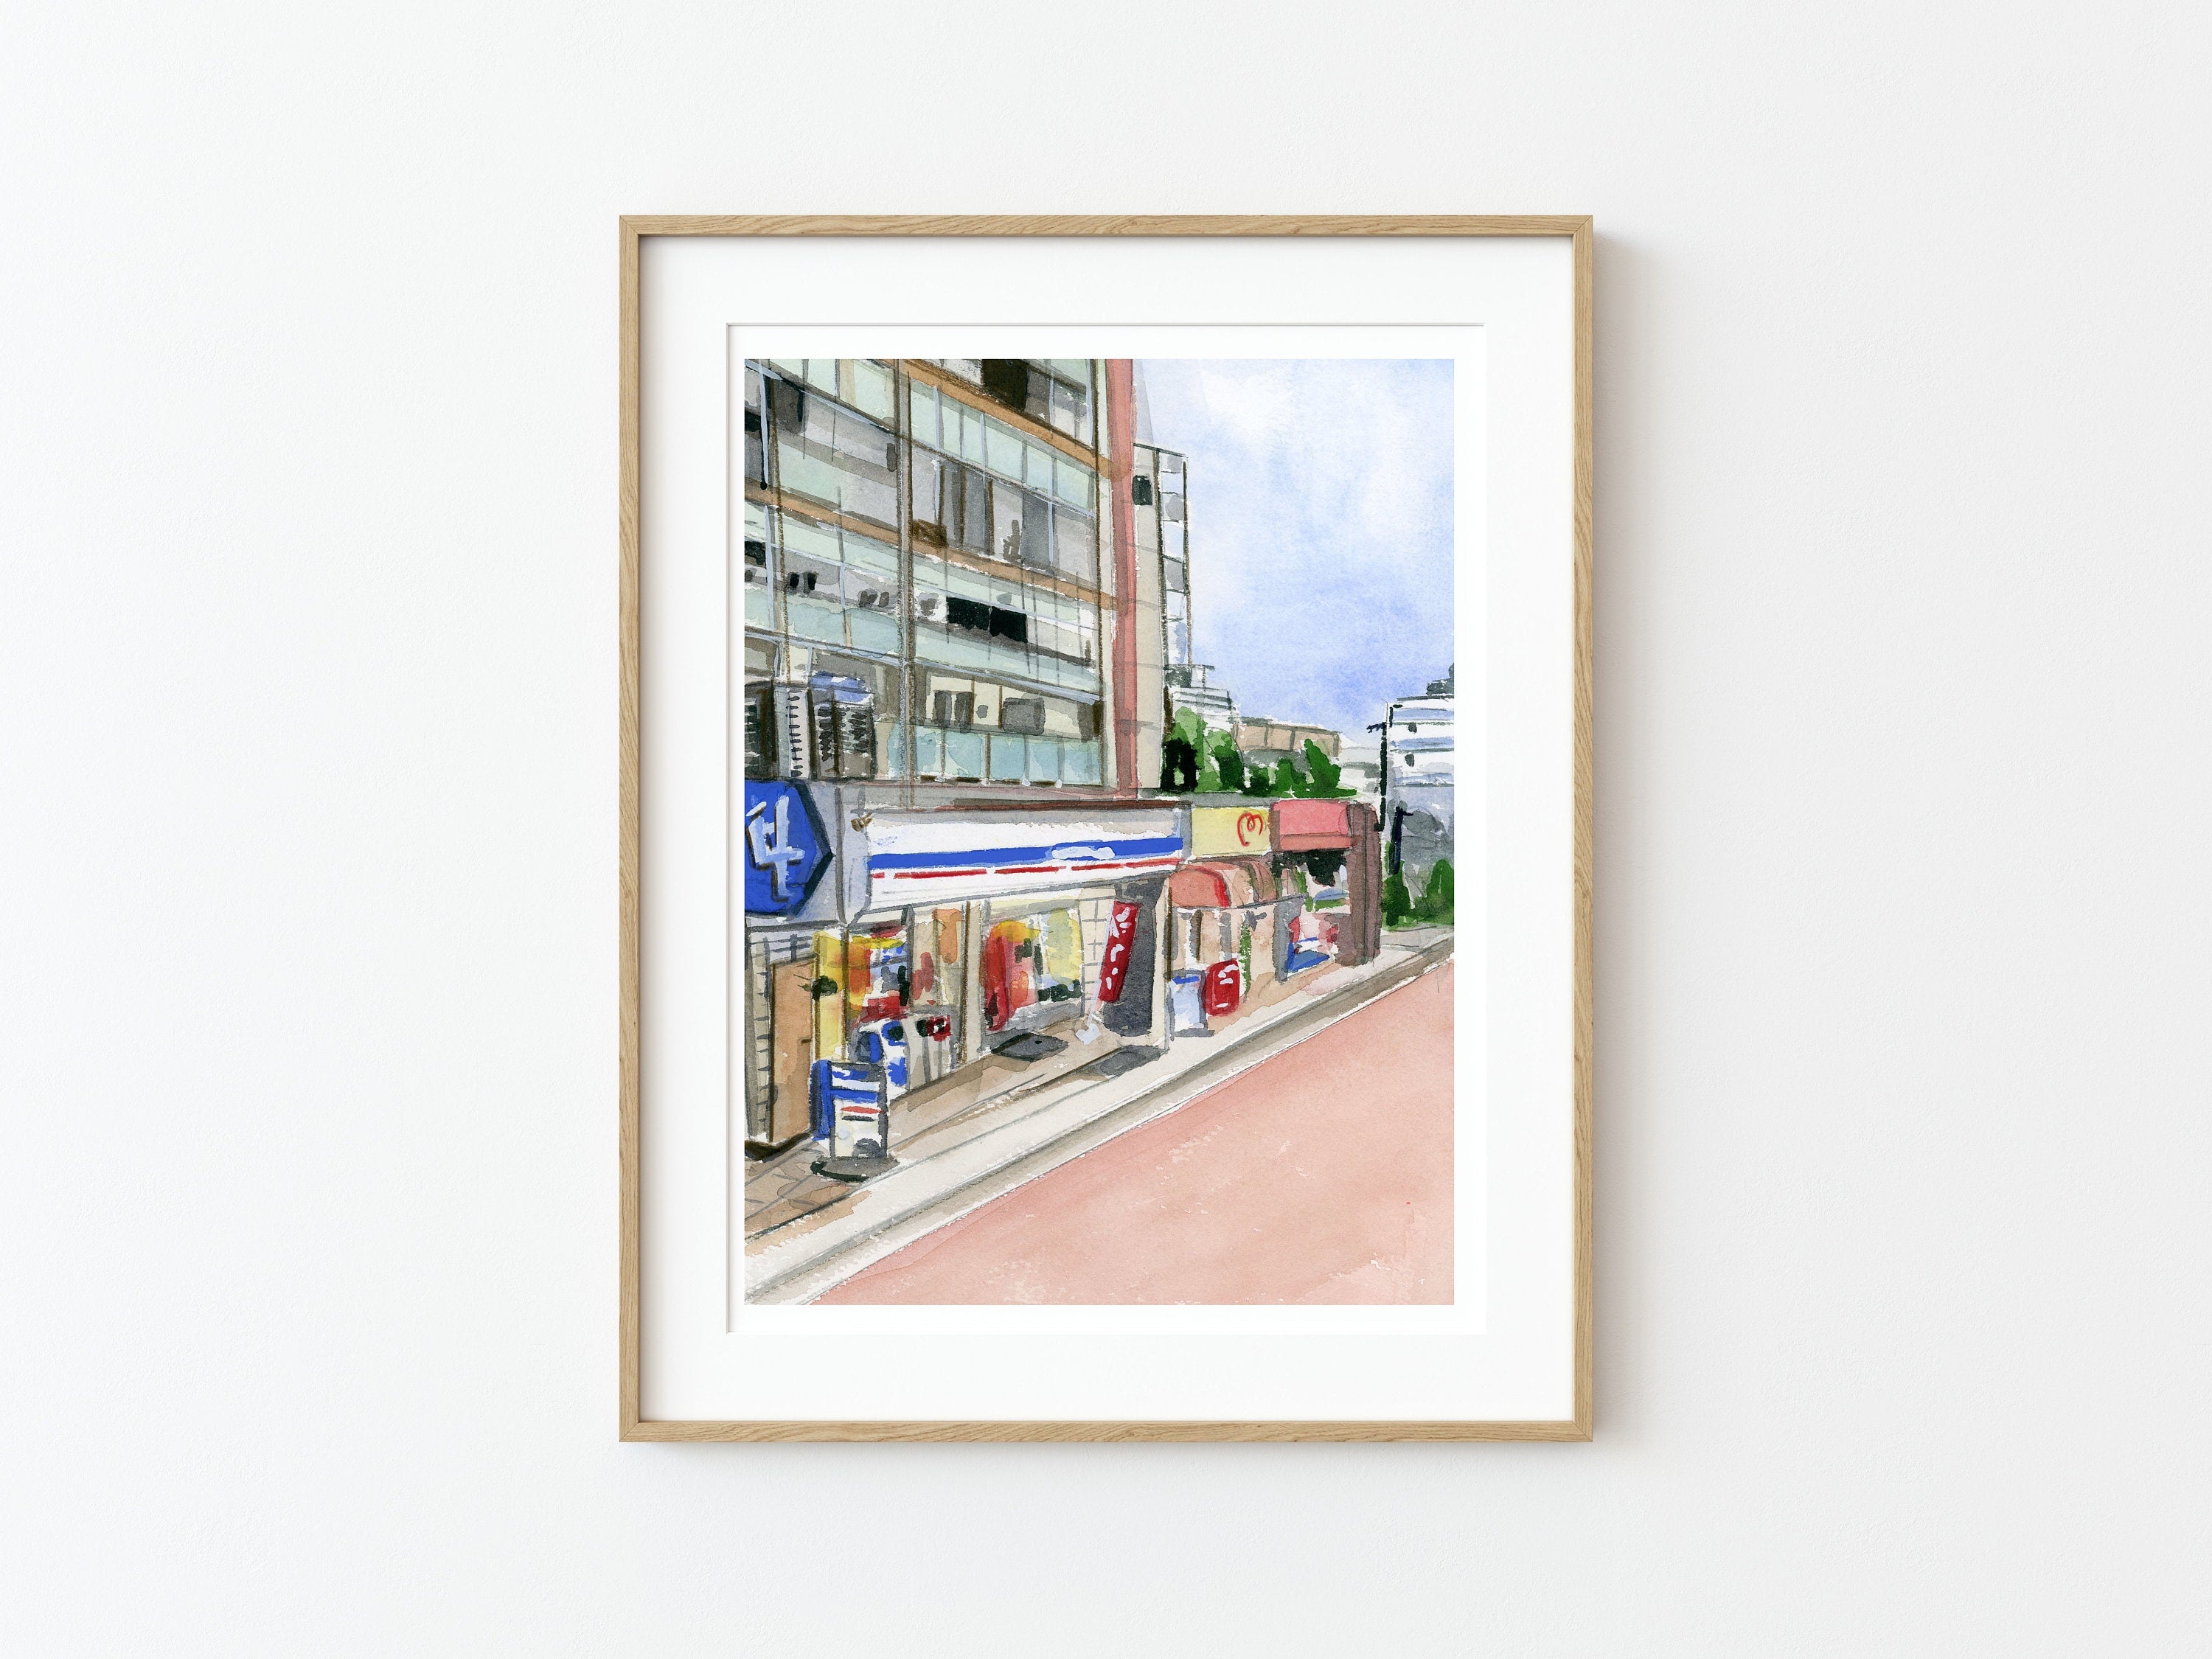 Lawsons, Japan print of painting by Medjool Studio. Print of original gouache painting of a Tokyo street view of a Lawsons supermarket and apartment building in Tokyo, Japan.